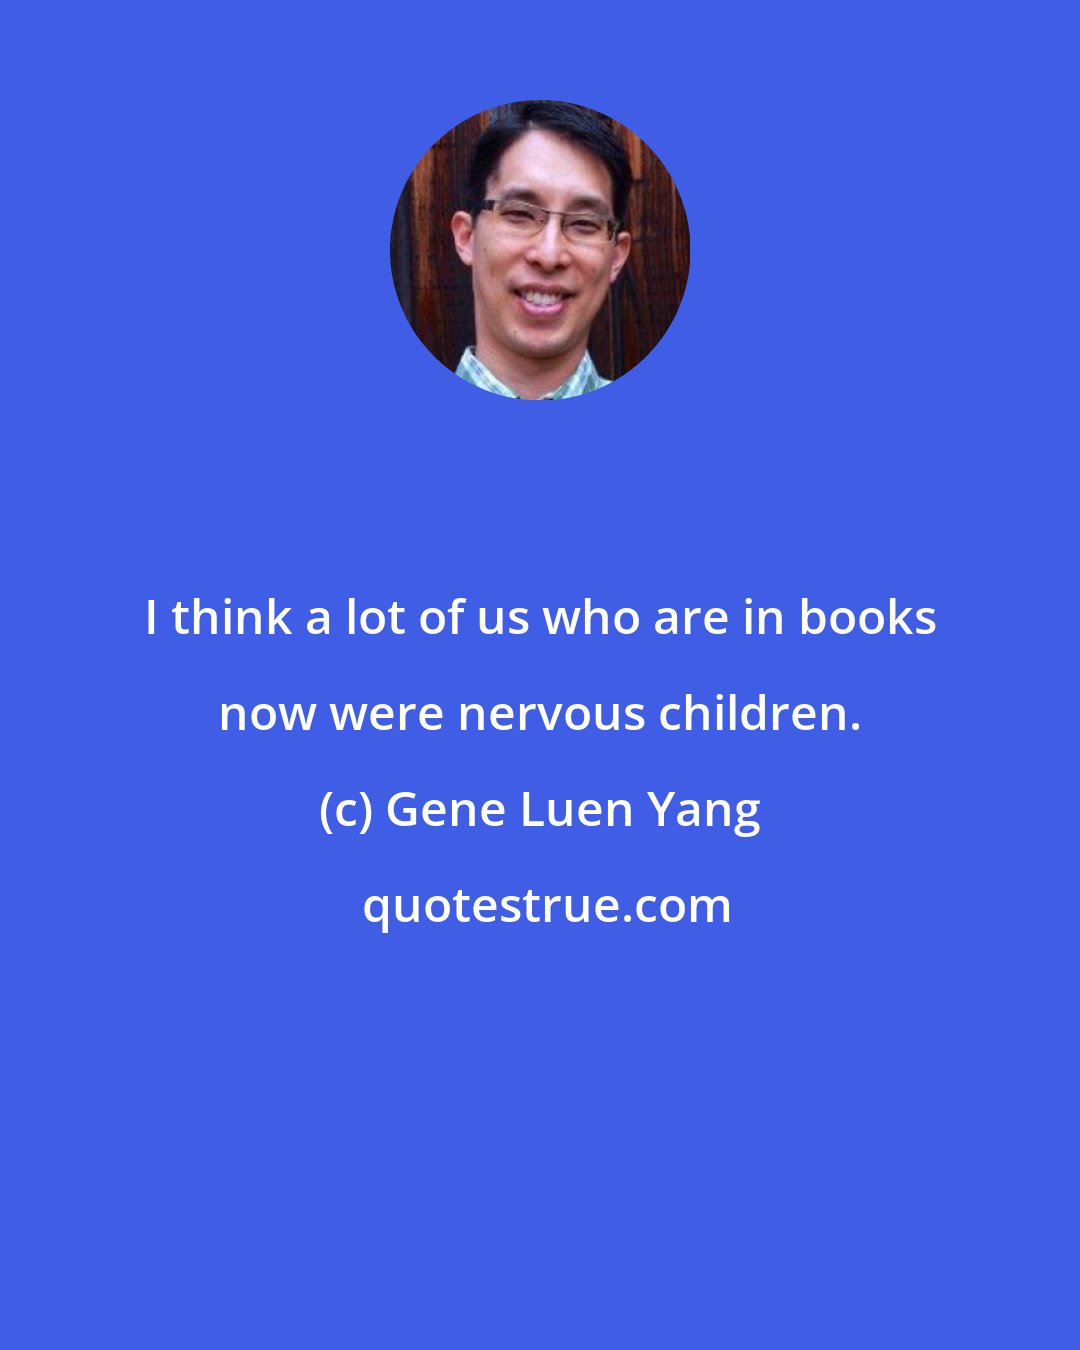 Gene Luen Yang: I think a lot of us who are in books now were nervous children.